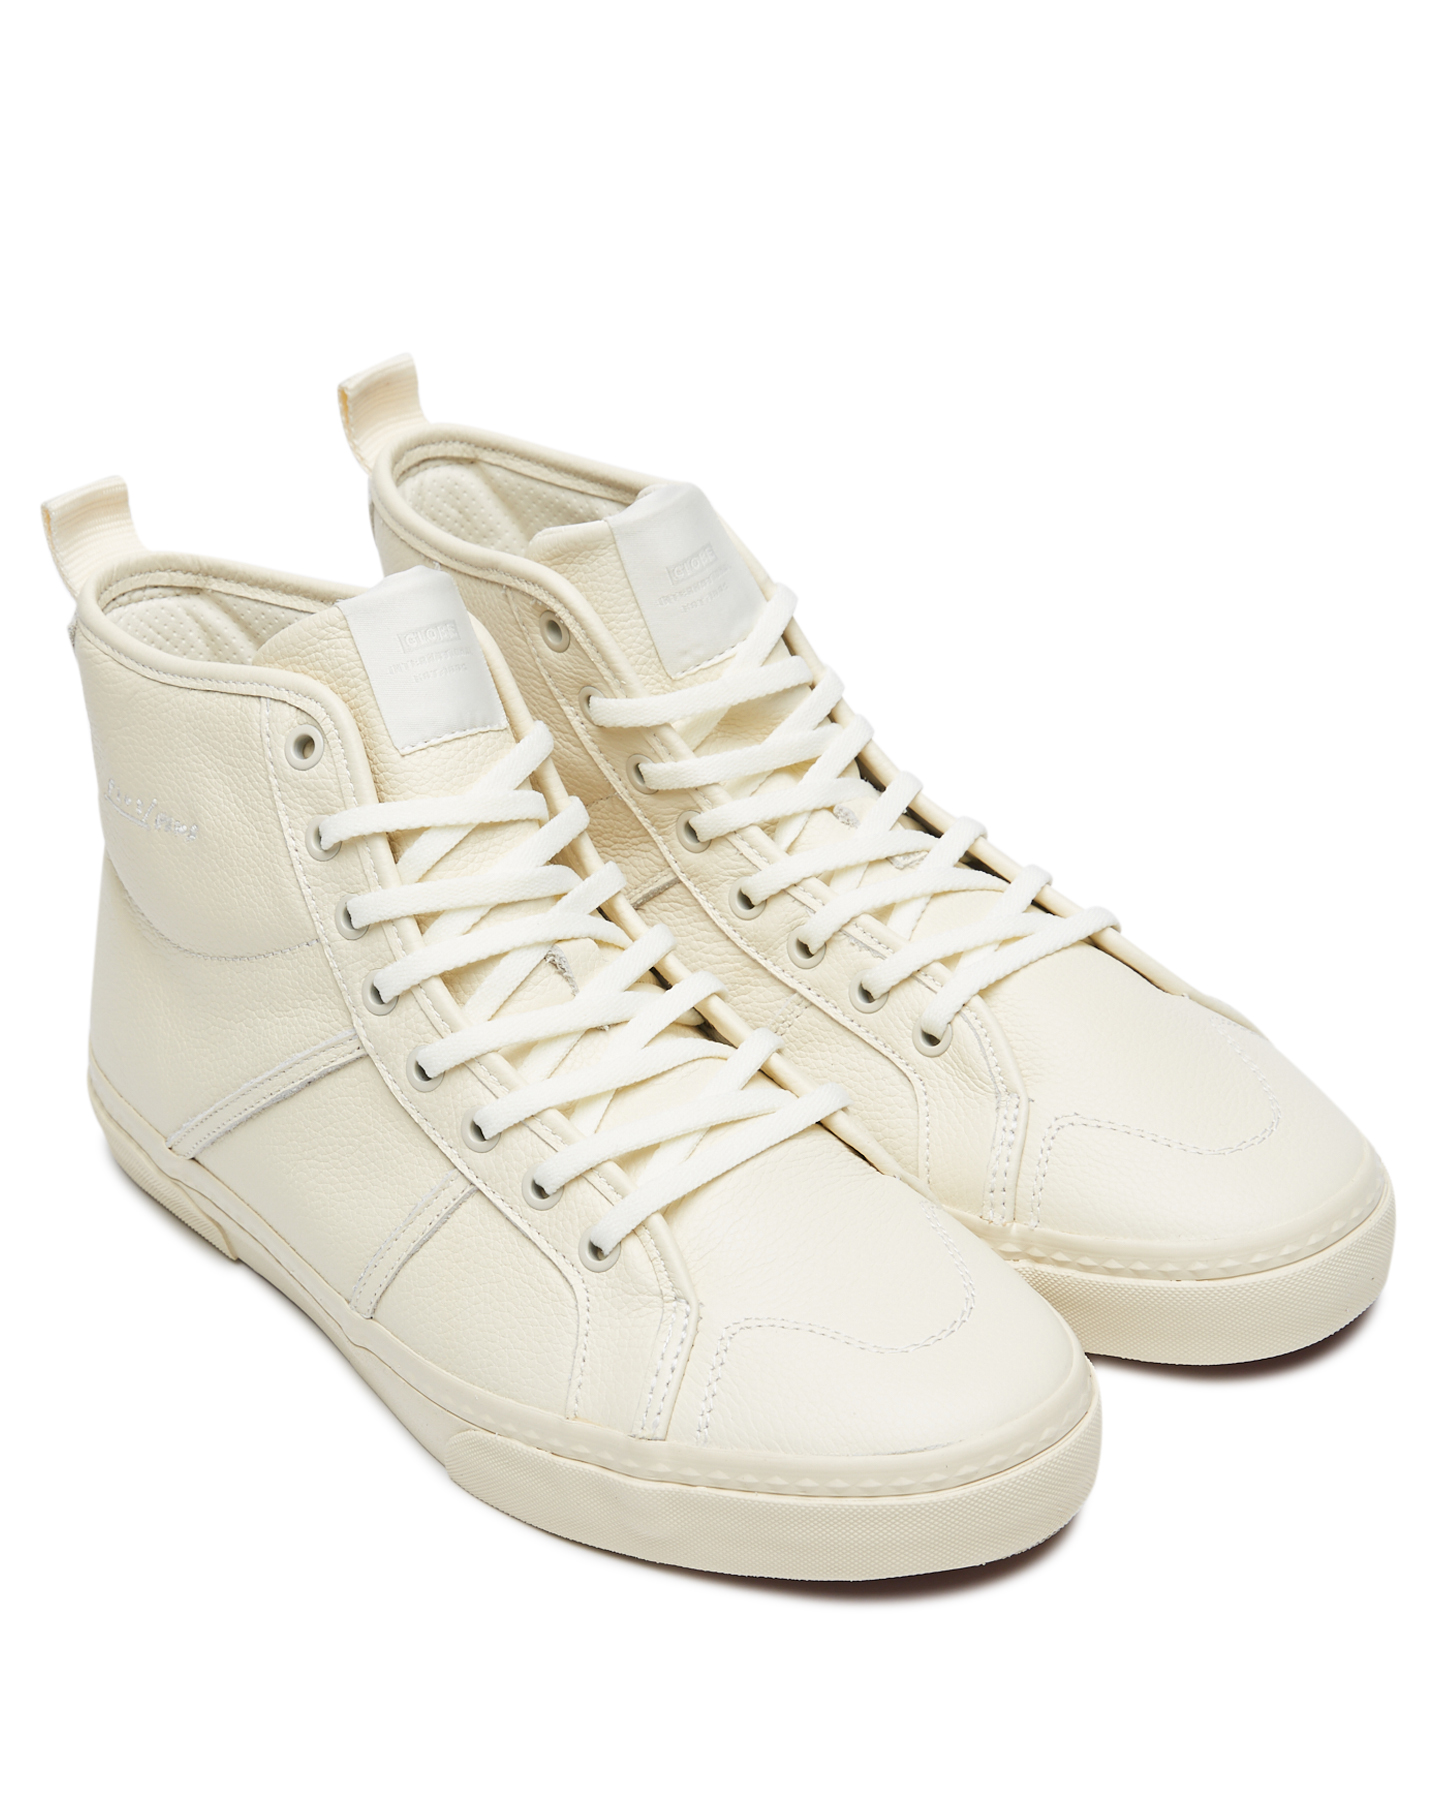 Globe Los Angered Ii Shoe - Off White Montano | SurfStitch